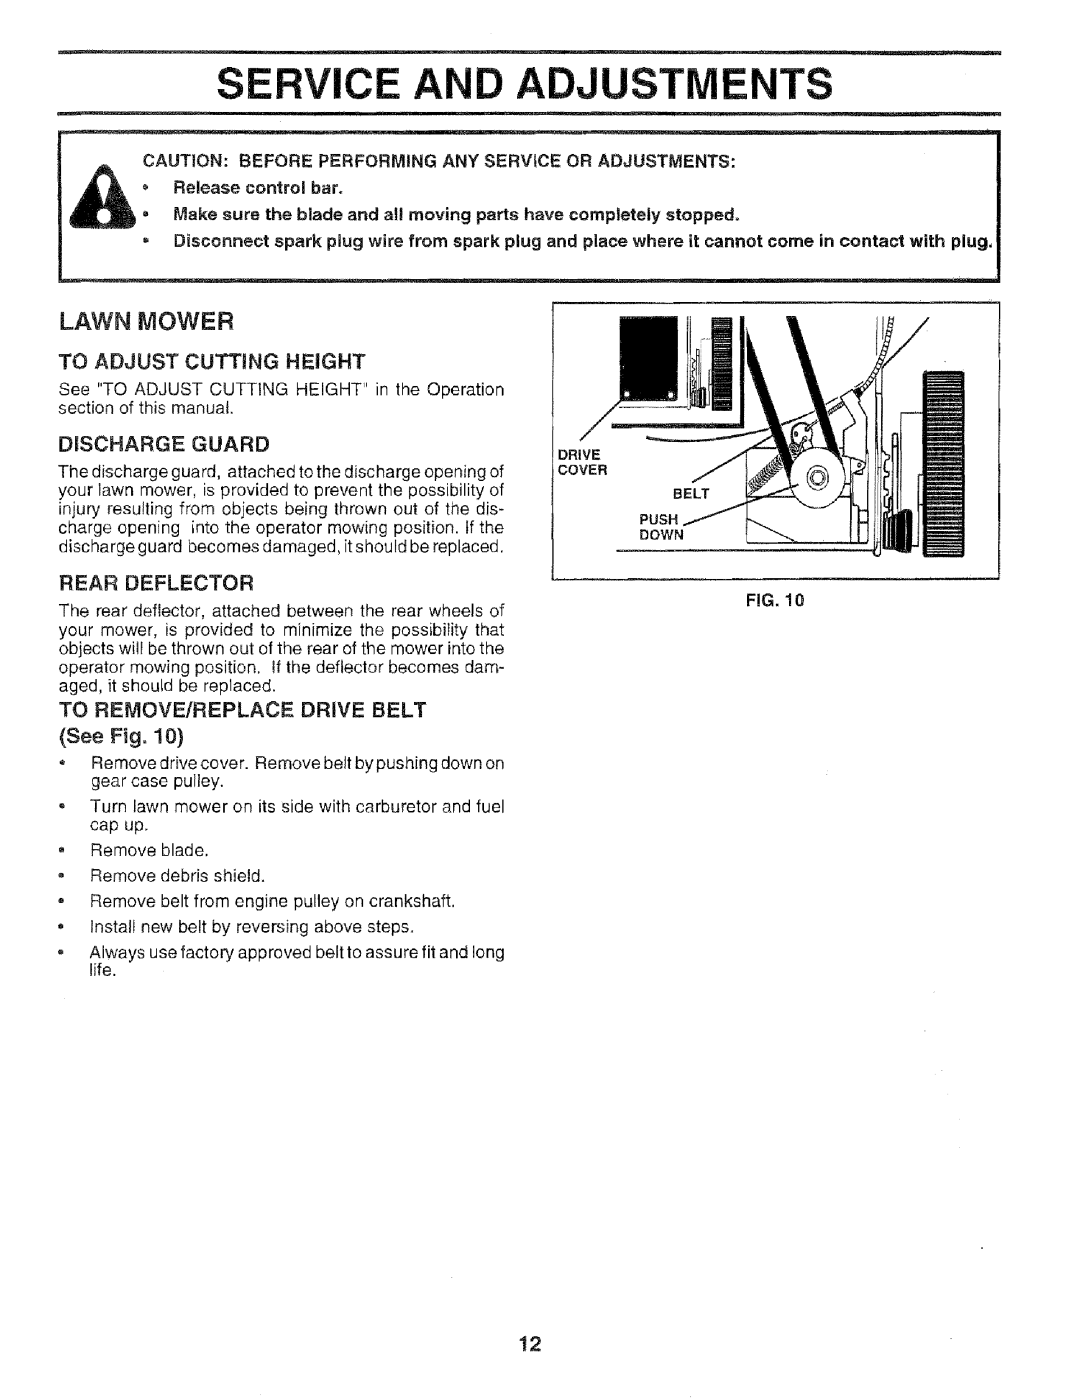 Sears 975502, 14.3 An A Ustments, To Adjust Cutting Height, Discharge Guard, Rear Deflector, To Remove/Replace Drive Belt 